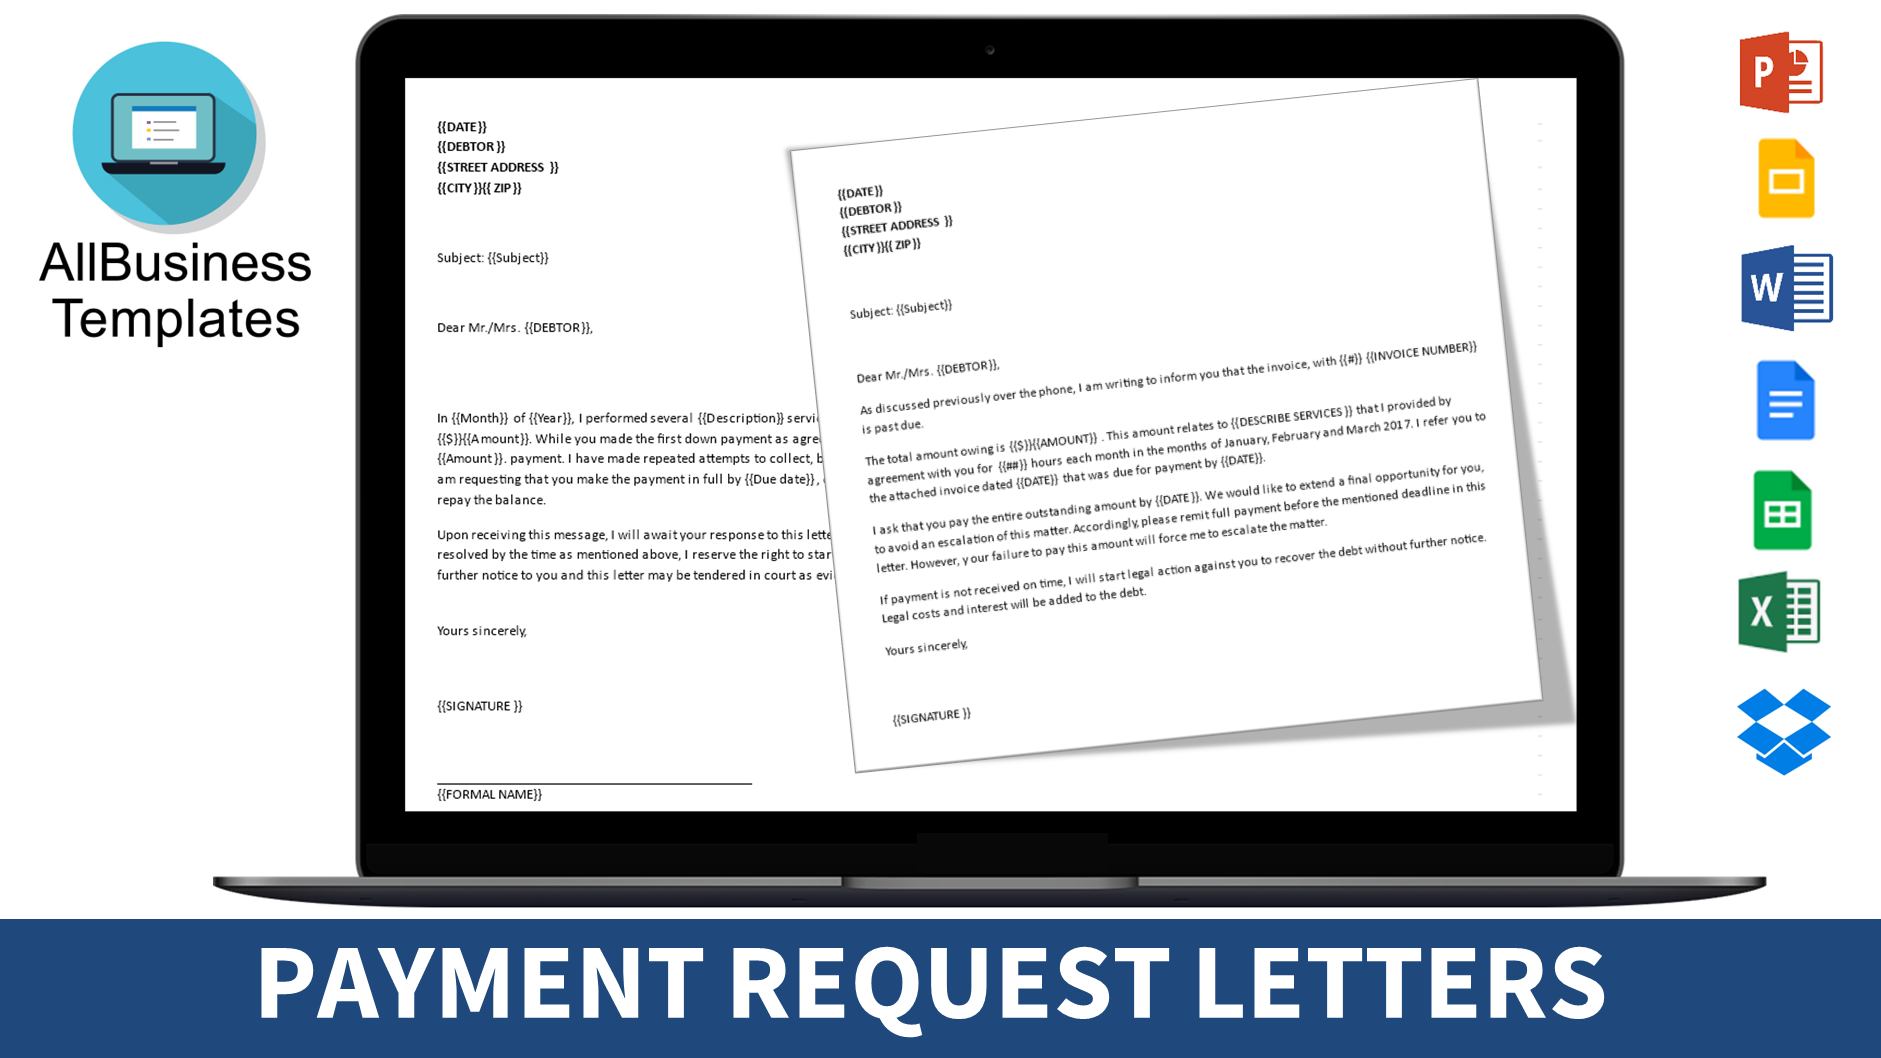 Payment request letter Templates at